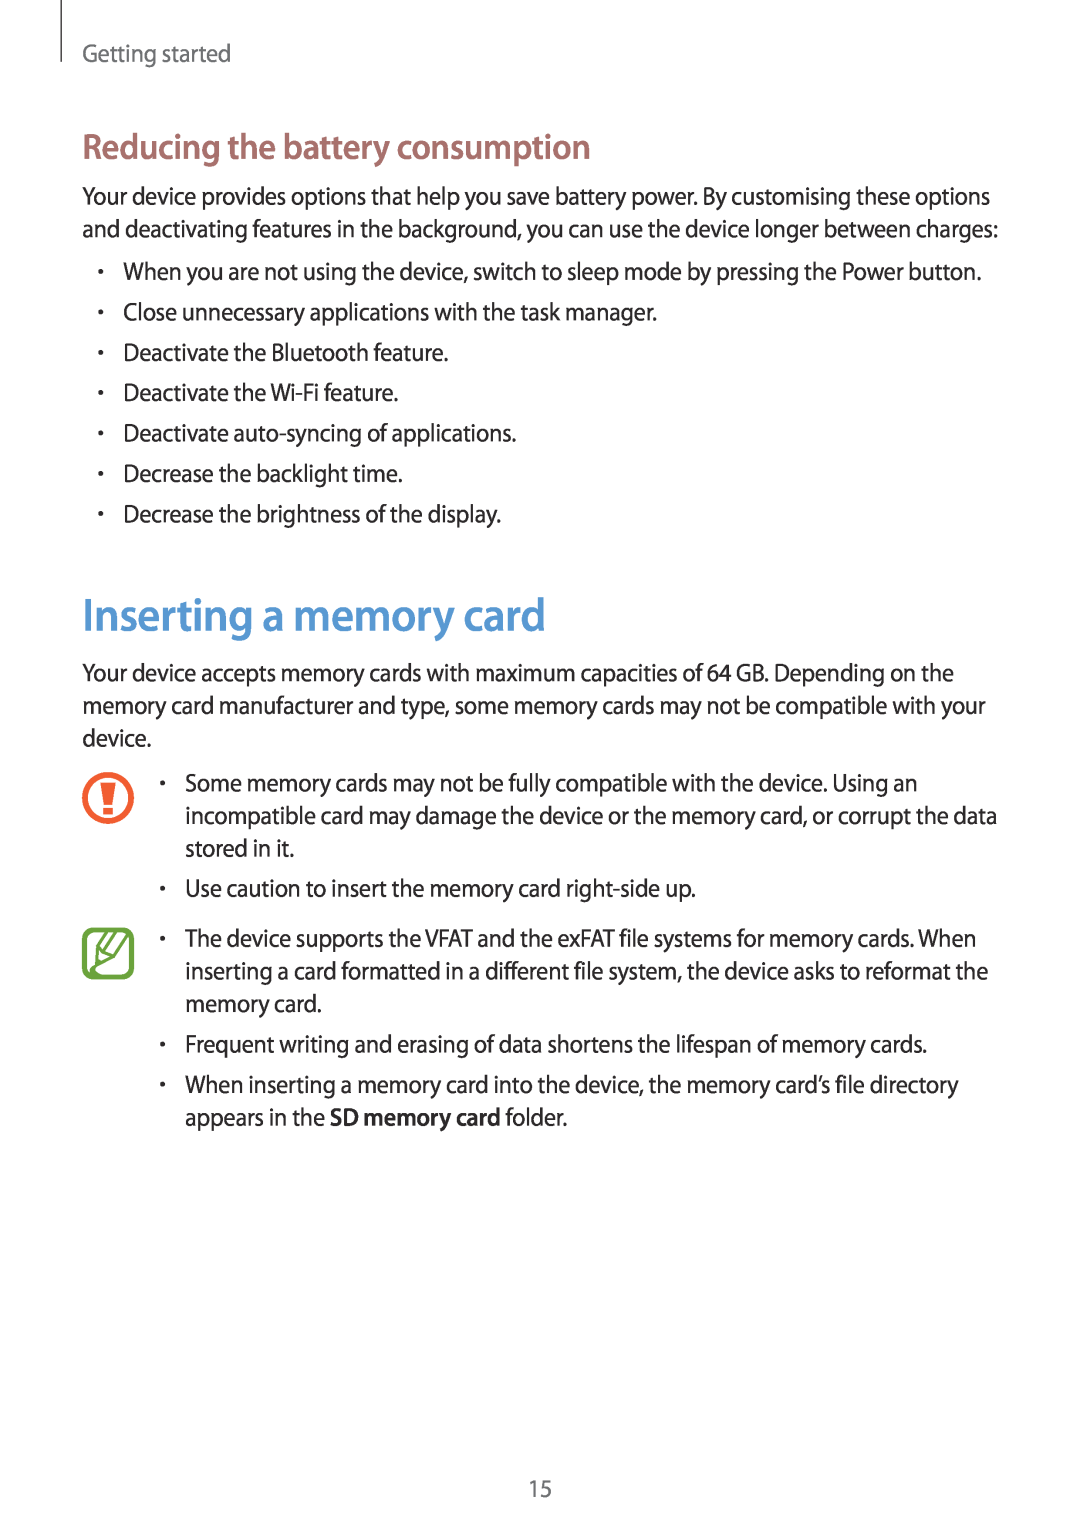 Samsung GT-I9060ZWDTPH, GT-I9060EGAXEF manual Inserting a memory card, Reducing the battery consumption, Getting started 